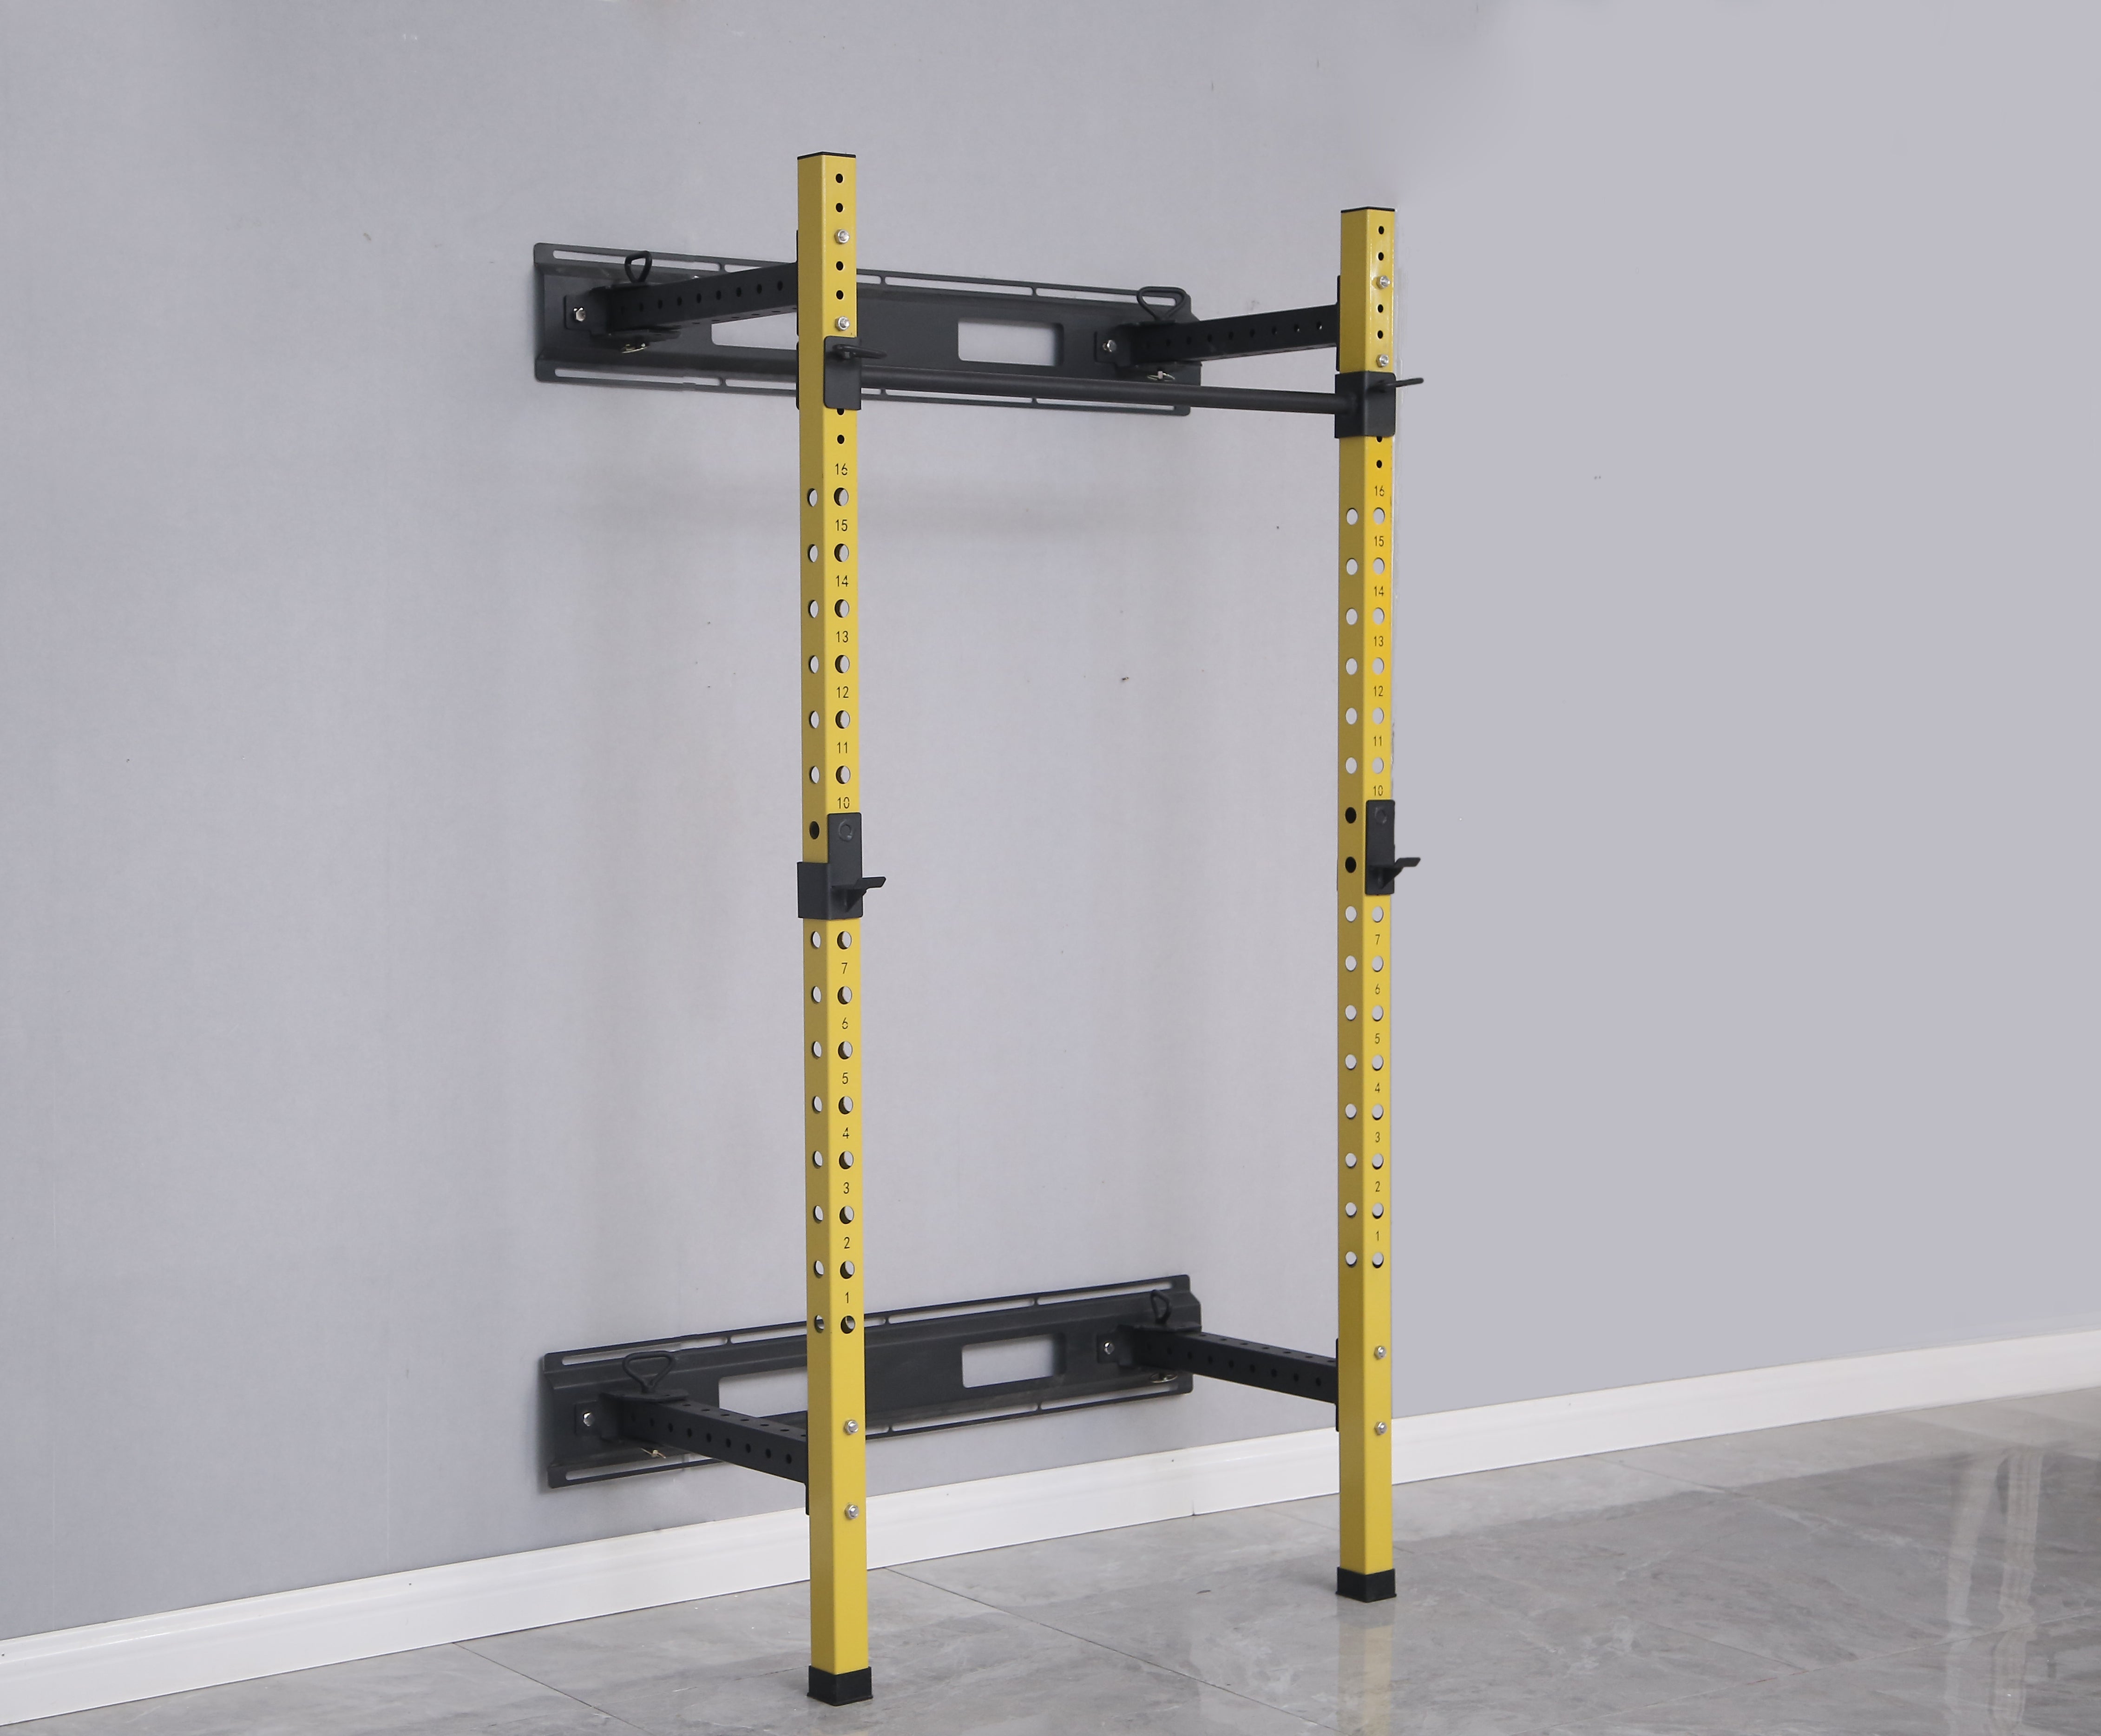 Gym; Home Gym; Garage Gym; Sports; Workout; Exercise; Exercise Equipment; Fitness; Health; Strength & Conditioning; Strength Training; Wall Mount; Power Rack; Wall Mounted Power Rack; Spotter Arms; Y Dip Bar